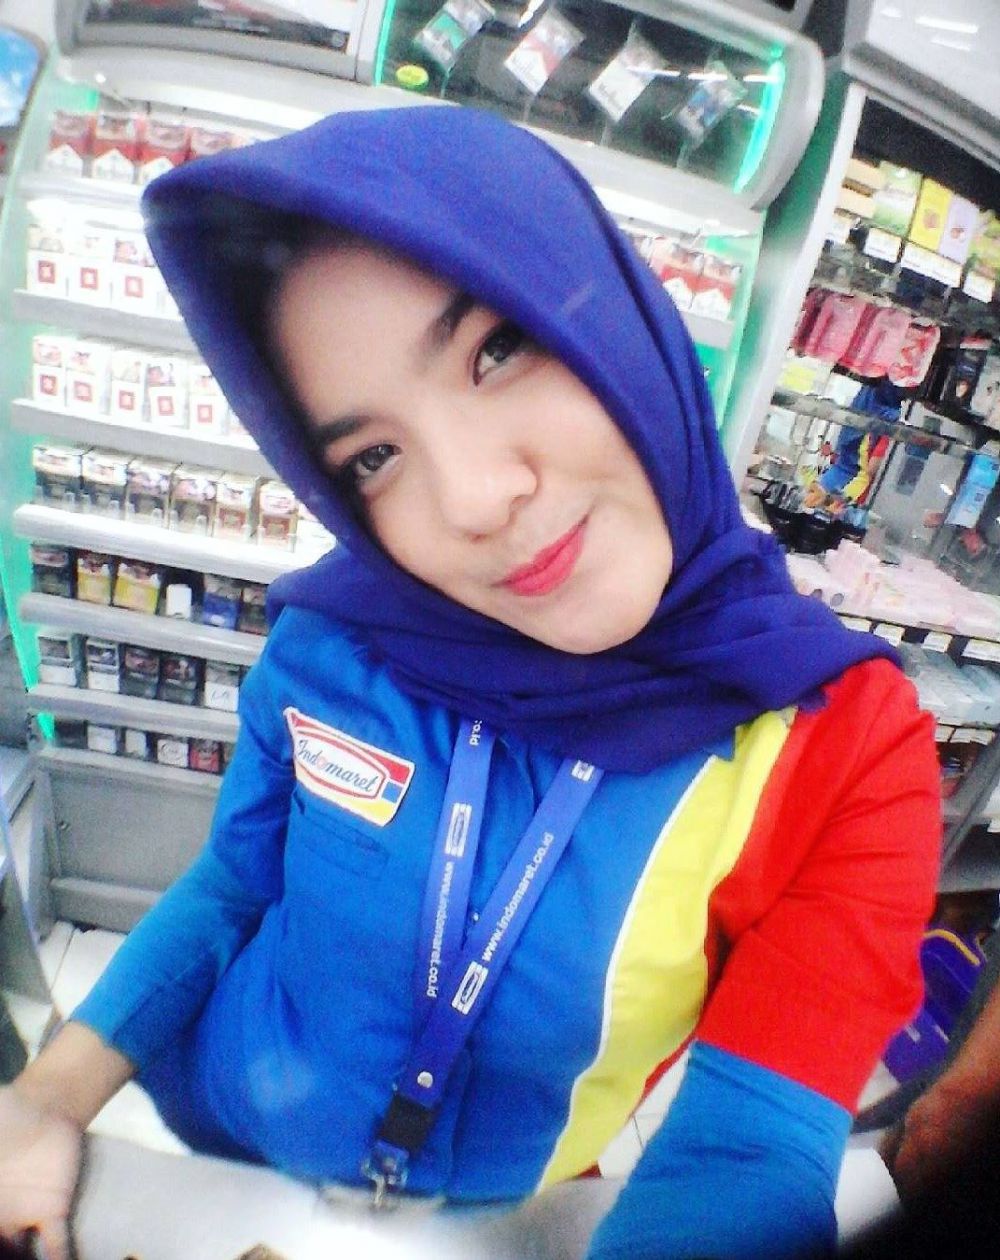  Indomaret  s beautiful cashier  will have you leaving your 